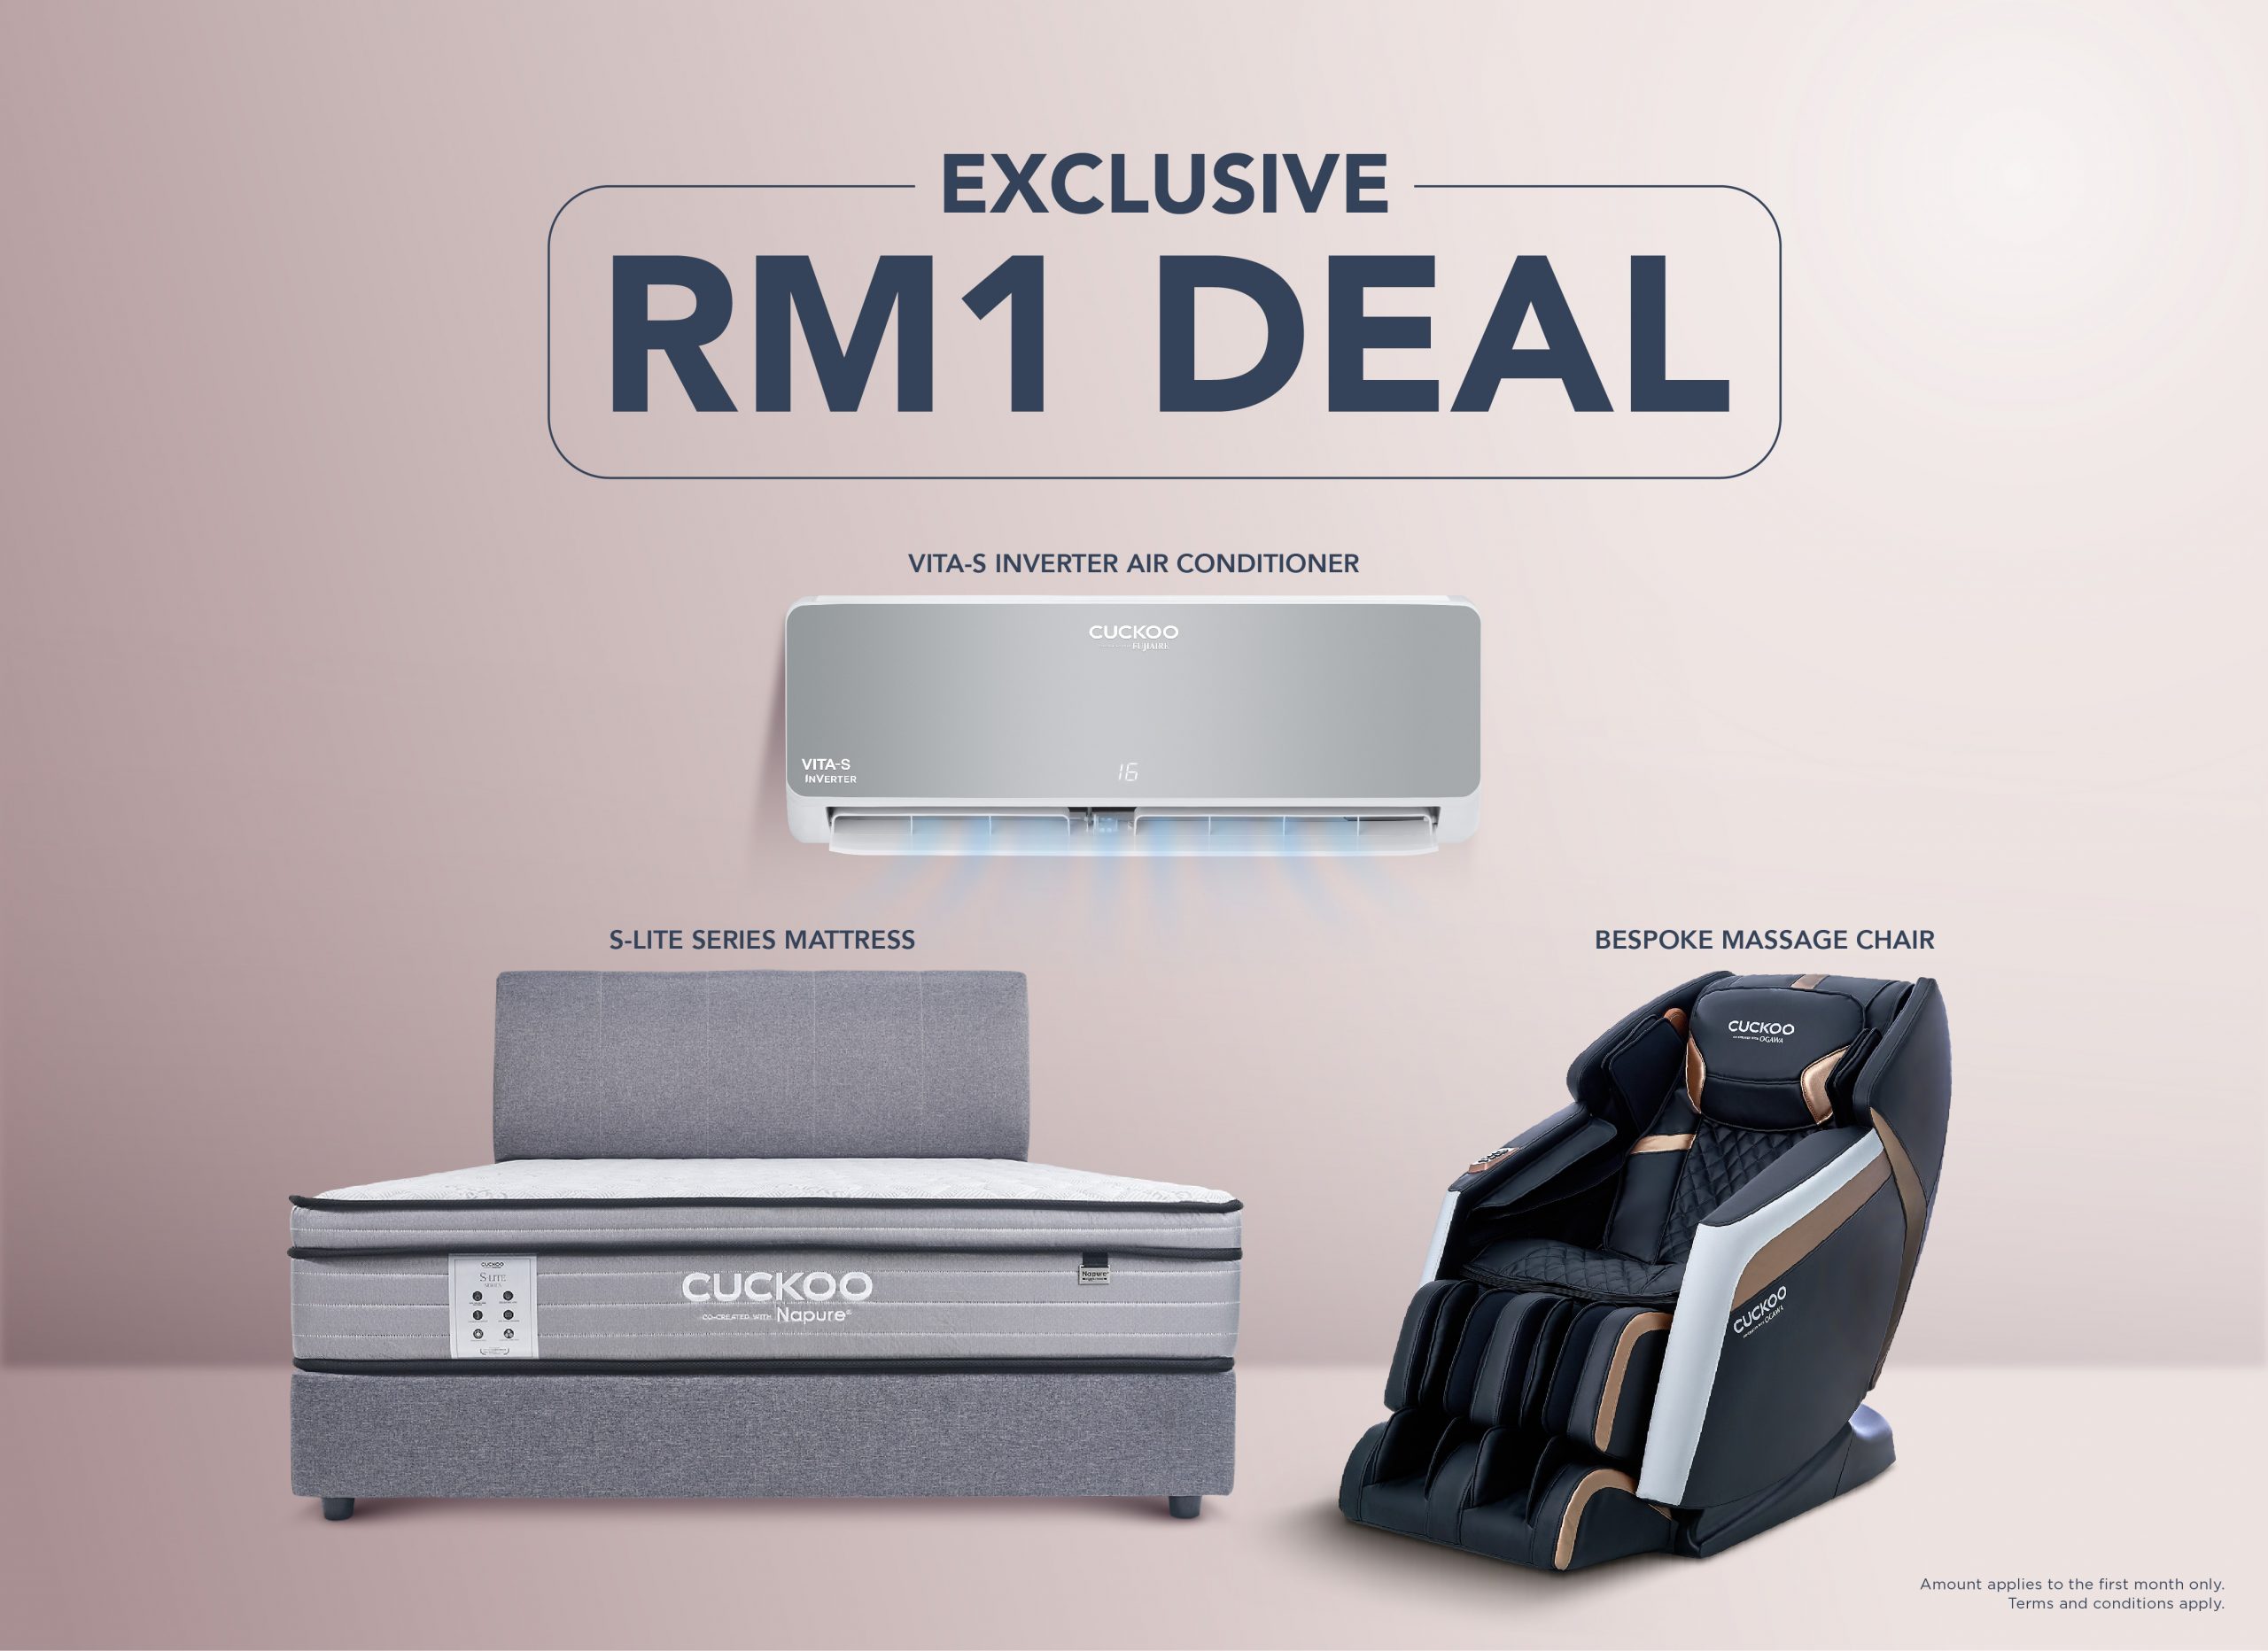 EXCLUSIVE RM1 DEAL FOR BEST SELLER PRODUCTS